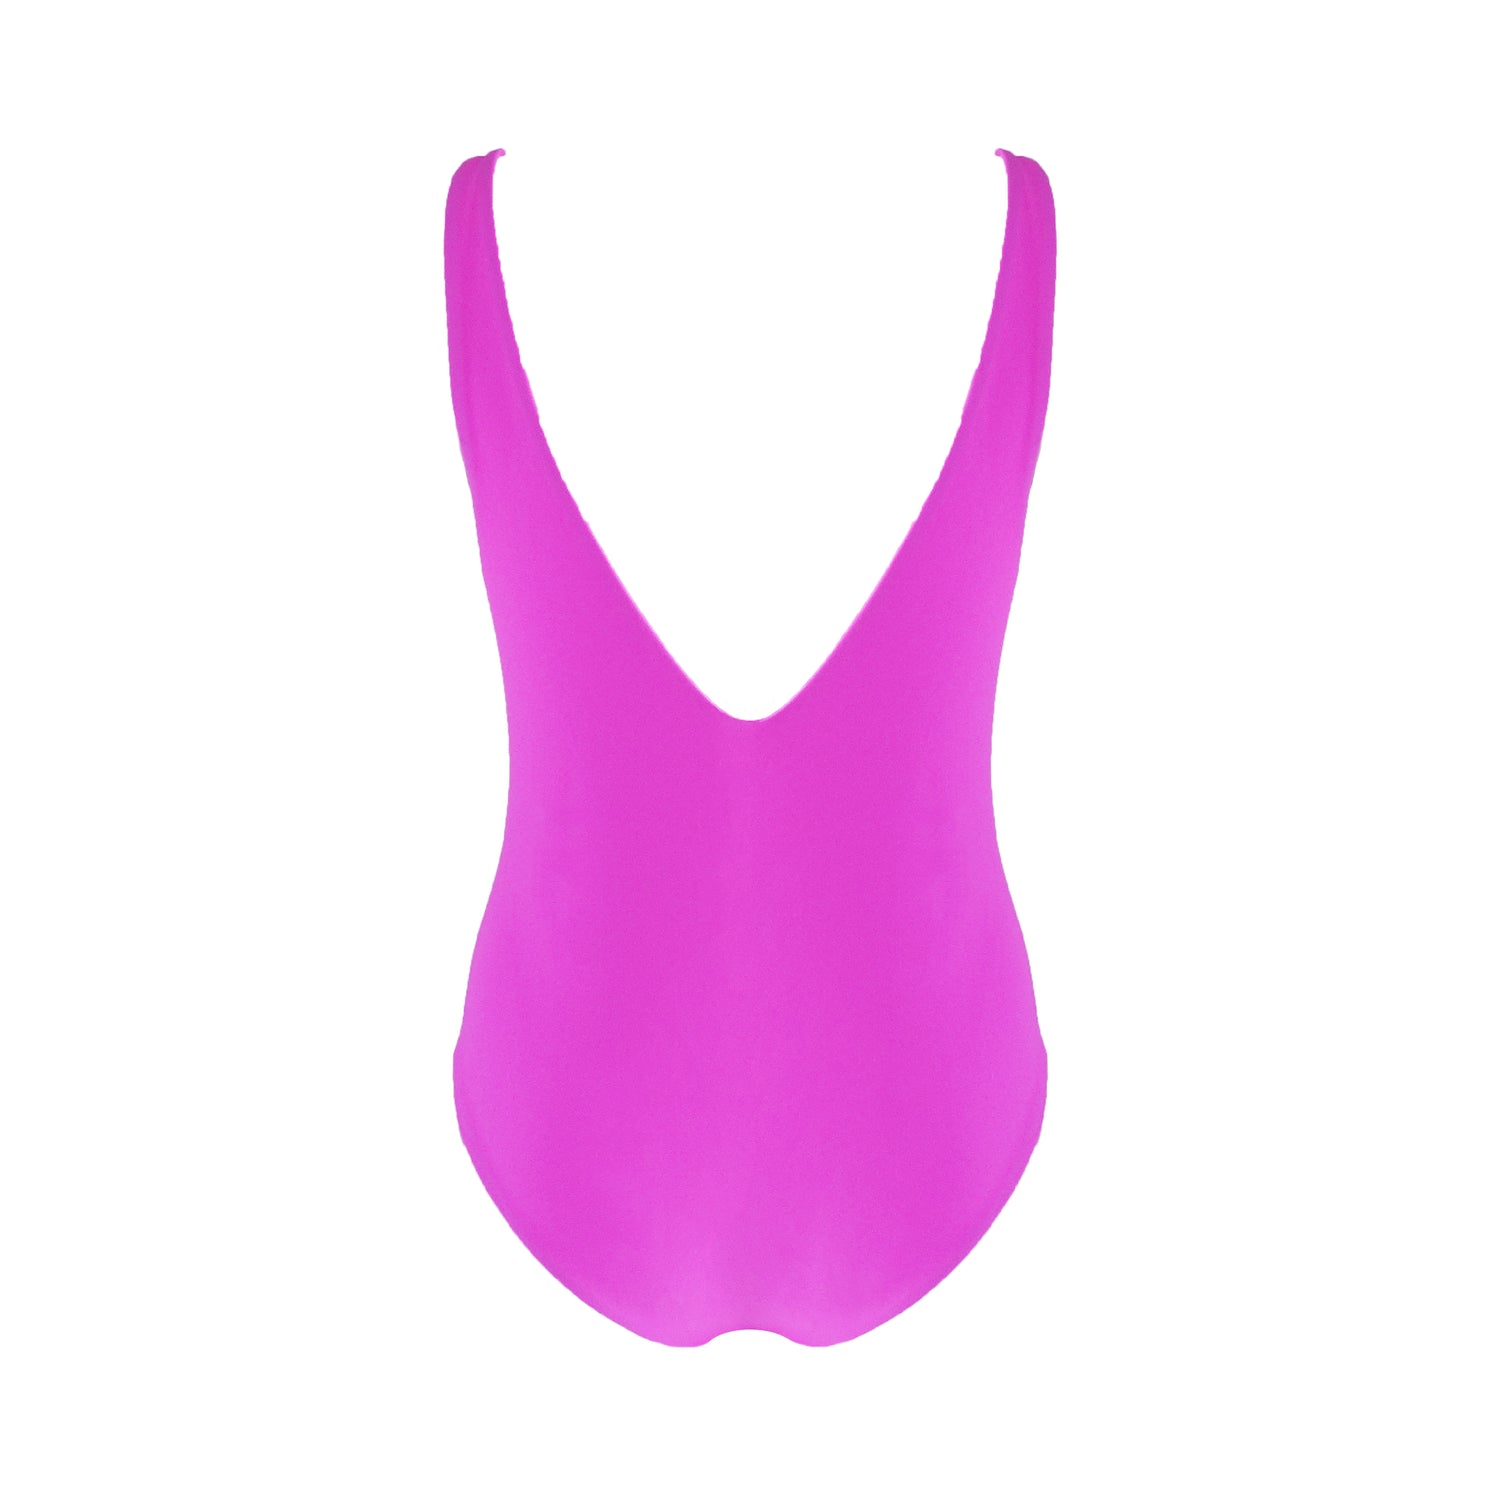 Back view of barbie pink plunging v-neck one piece swimsuit with low back, high cut legs, and cheeky bum coverage.